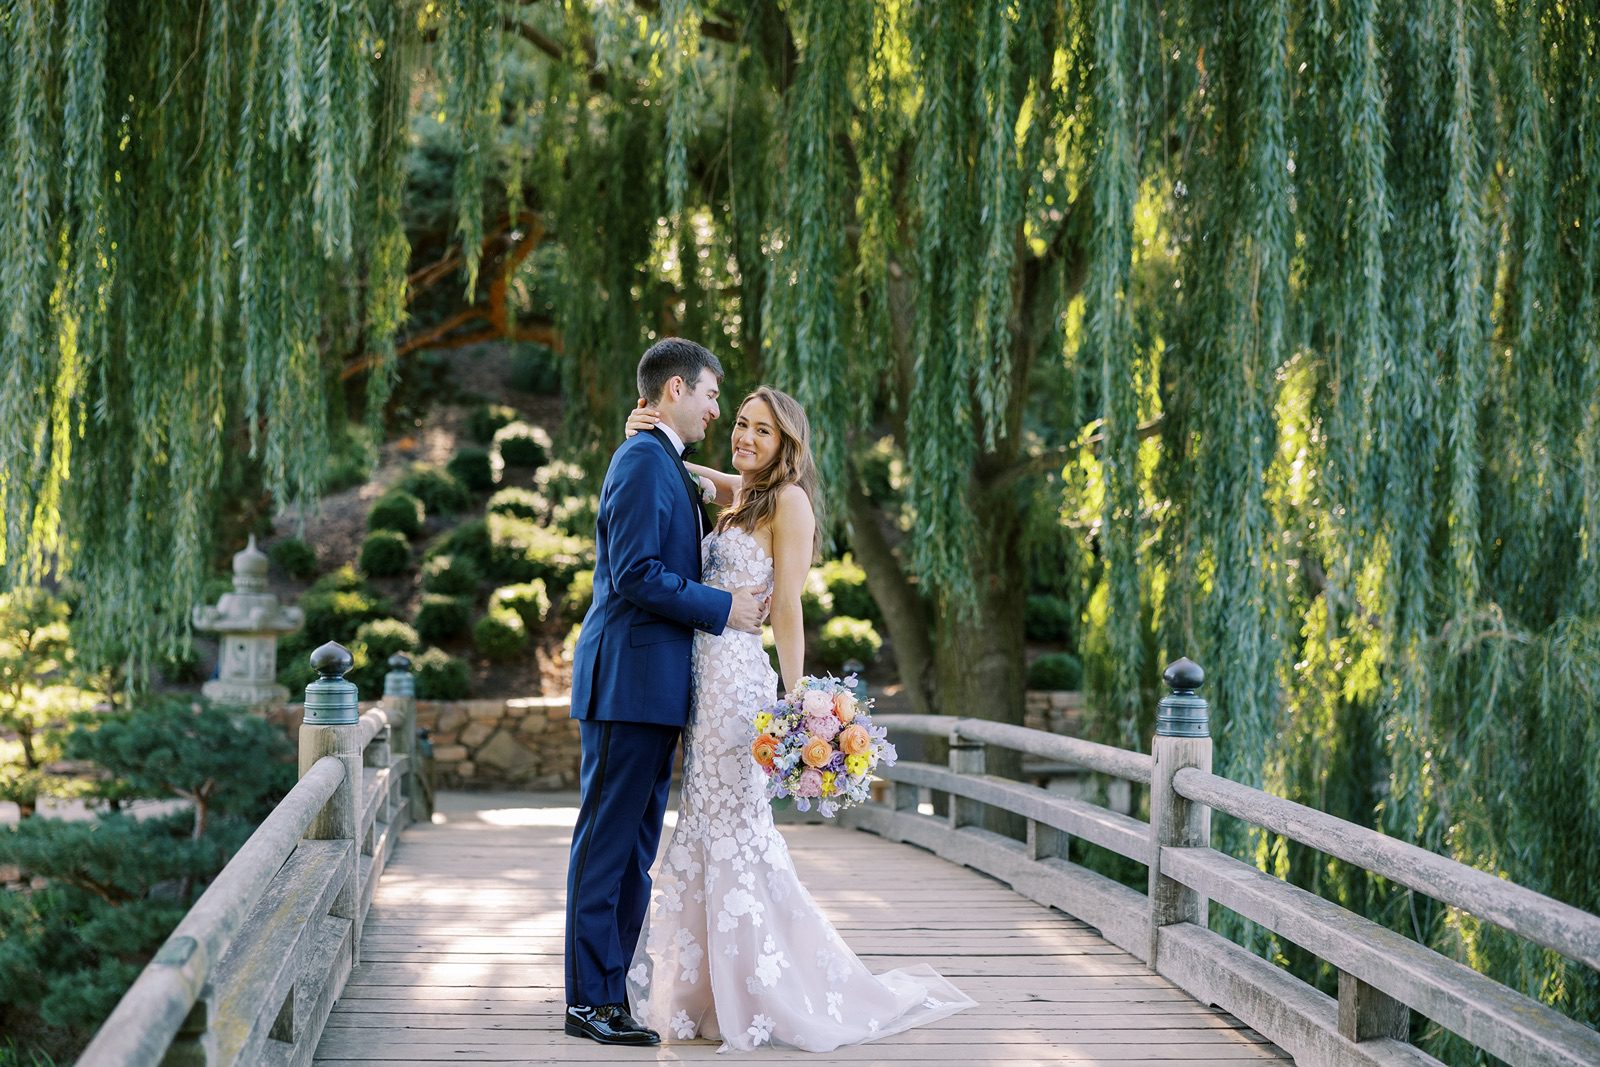 Bride and groom pose for couples portraits at their Chicago Botanic Garden wedding